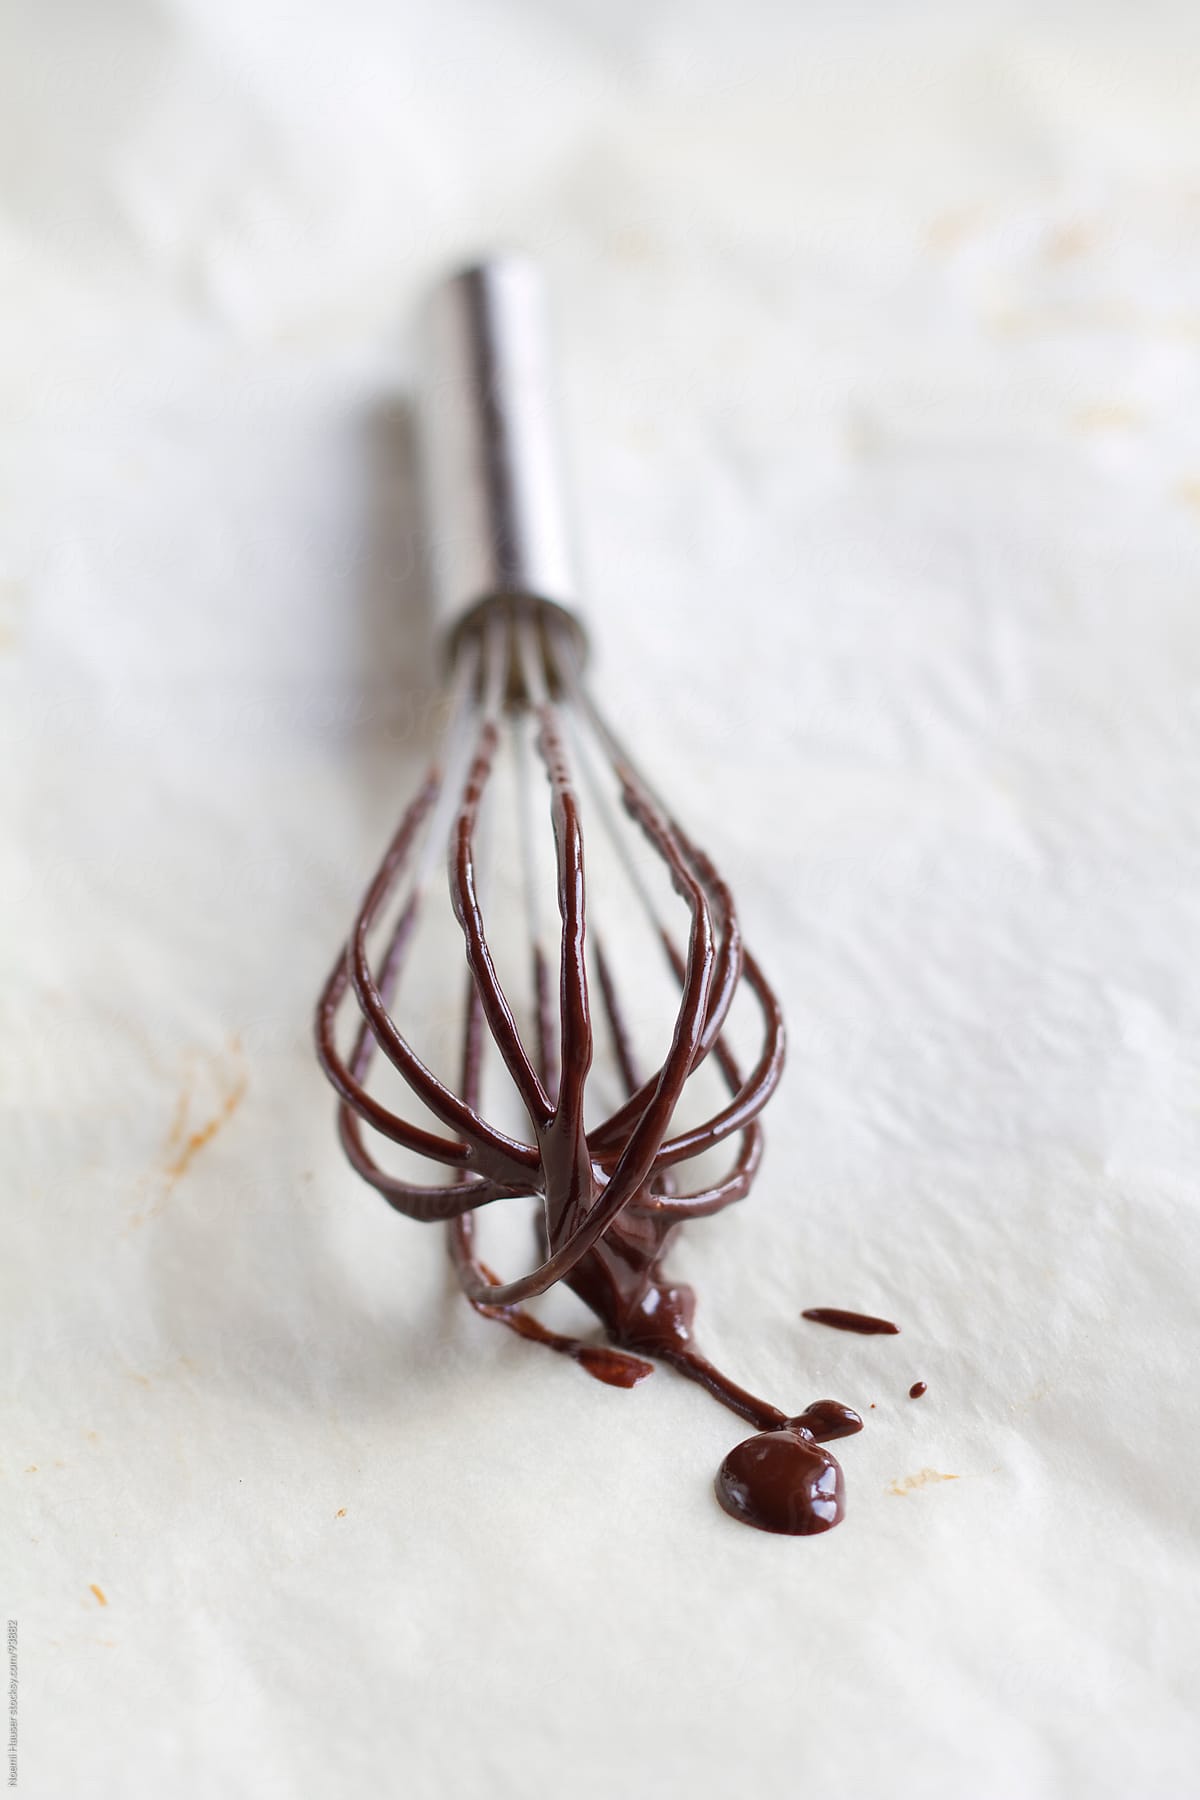 Whisk with molten chocolate